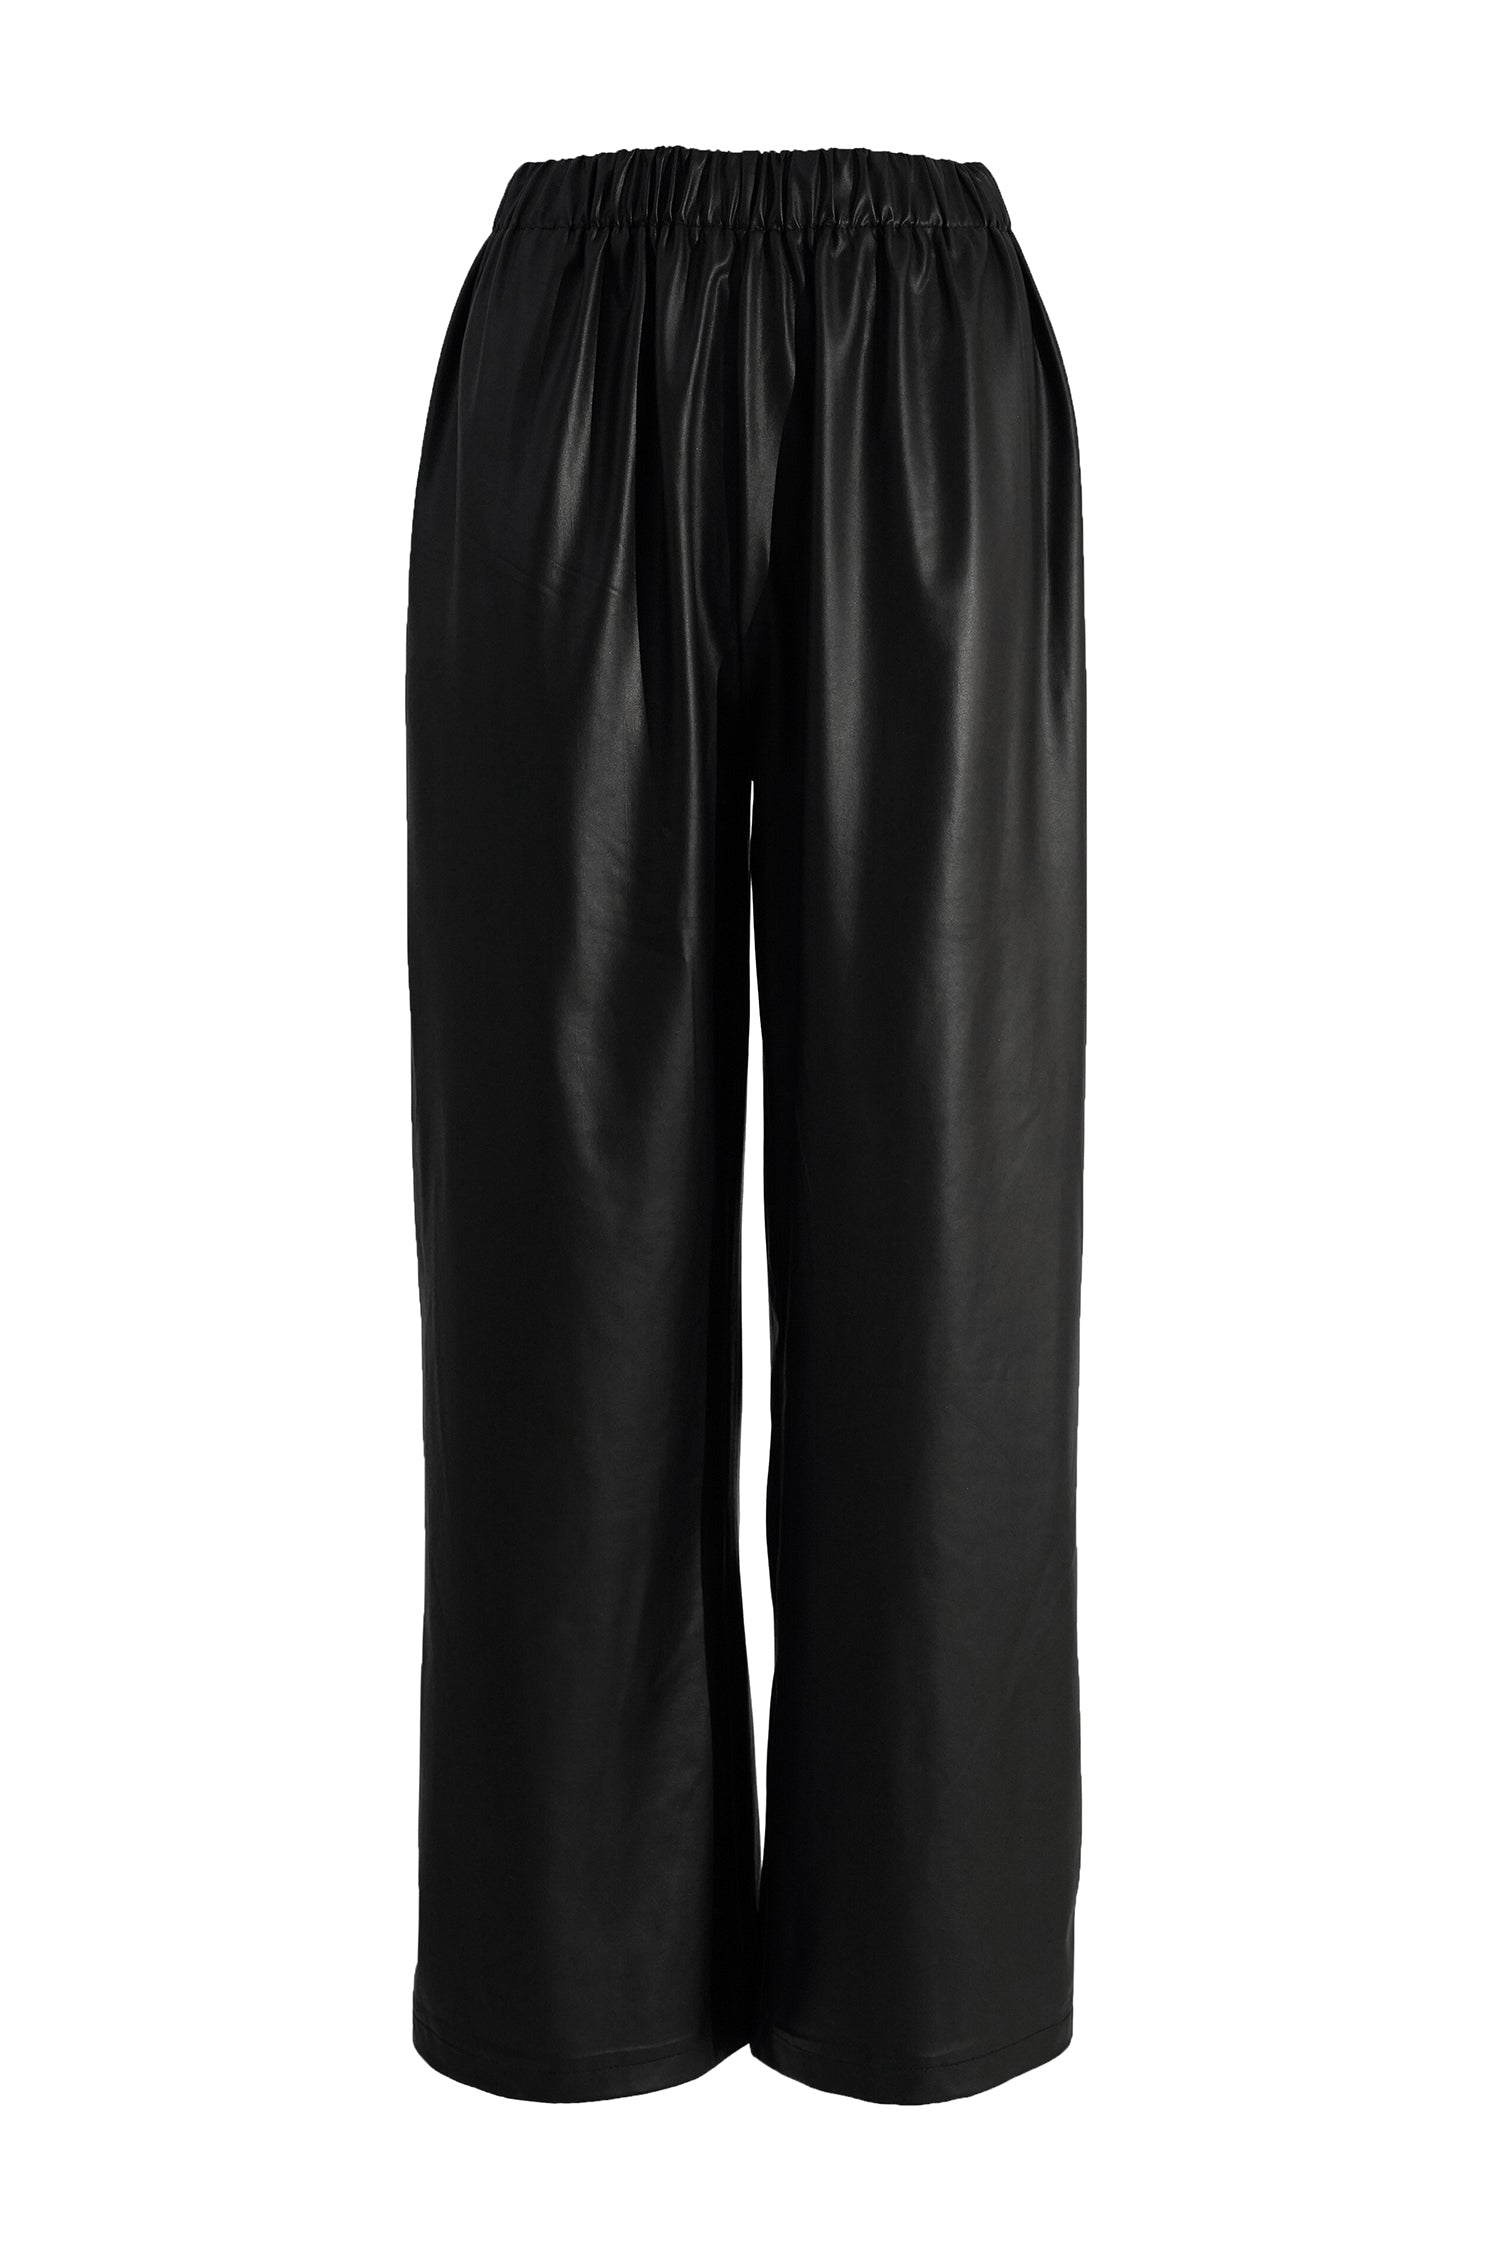 GINASY Black Casual Pants Size L - 53% off